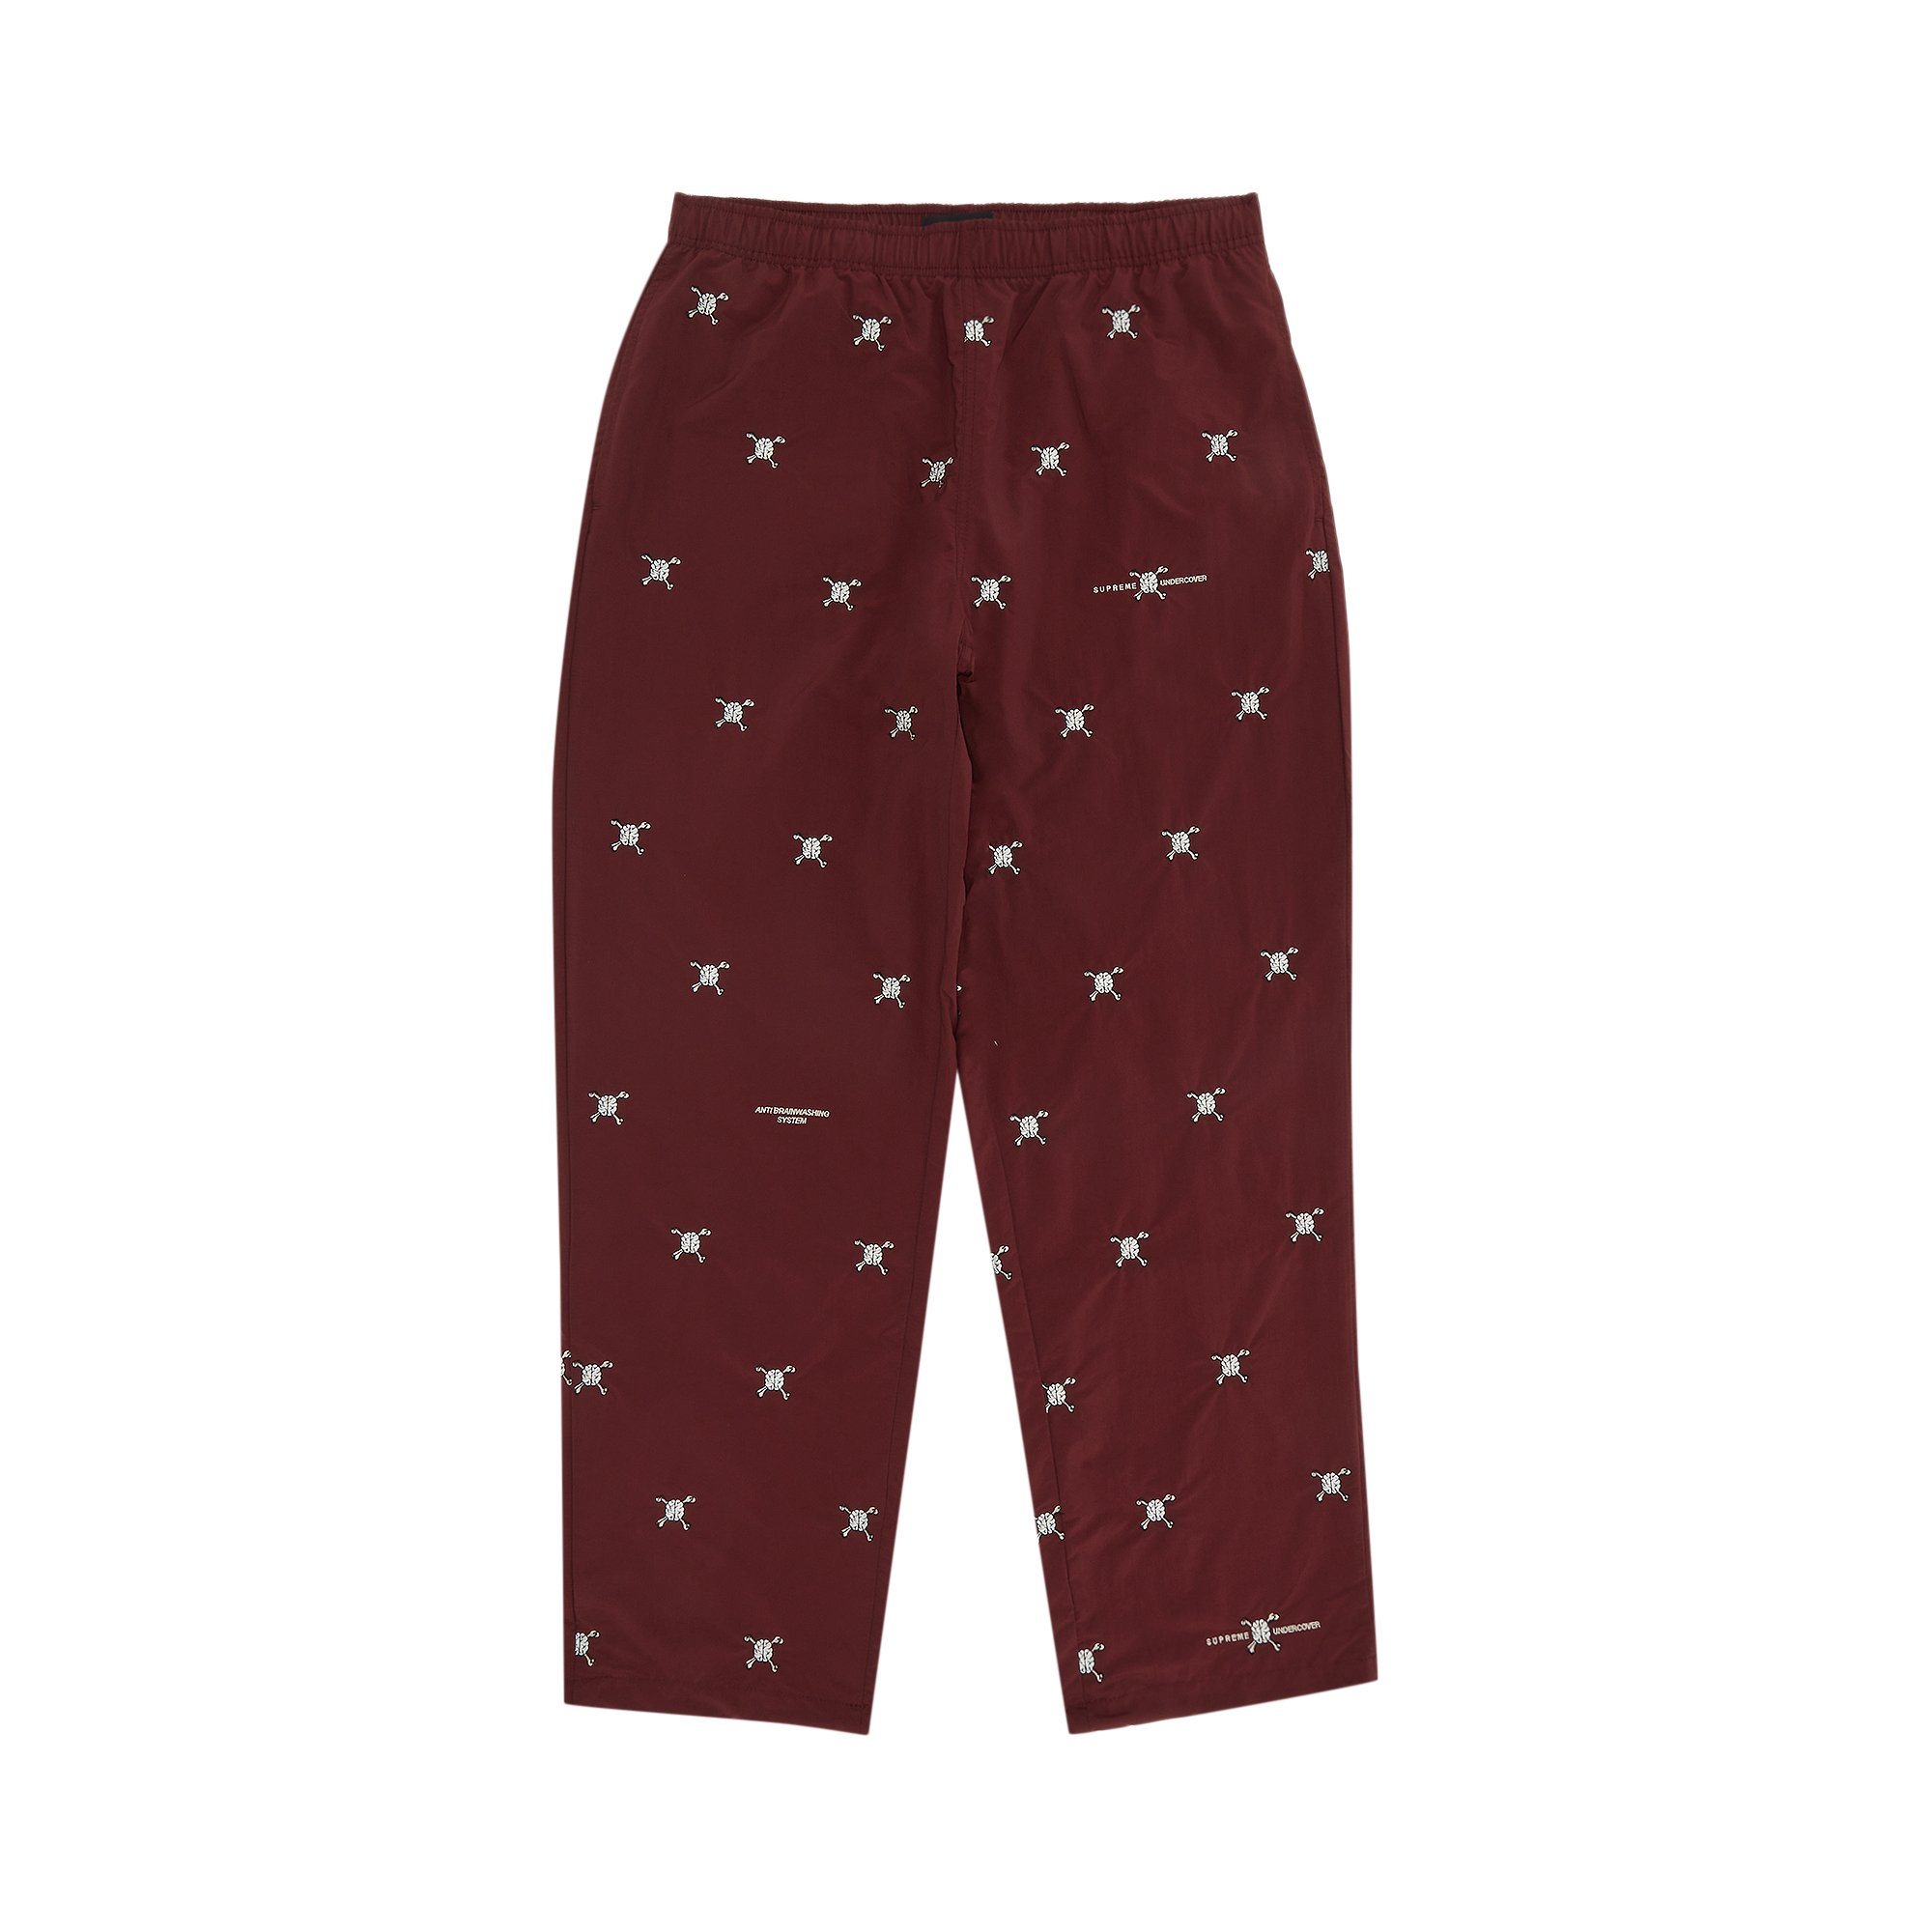 Supreme x UNDERCOVER Track Pant 'Burgundy'